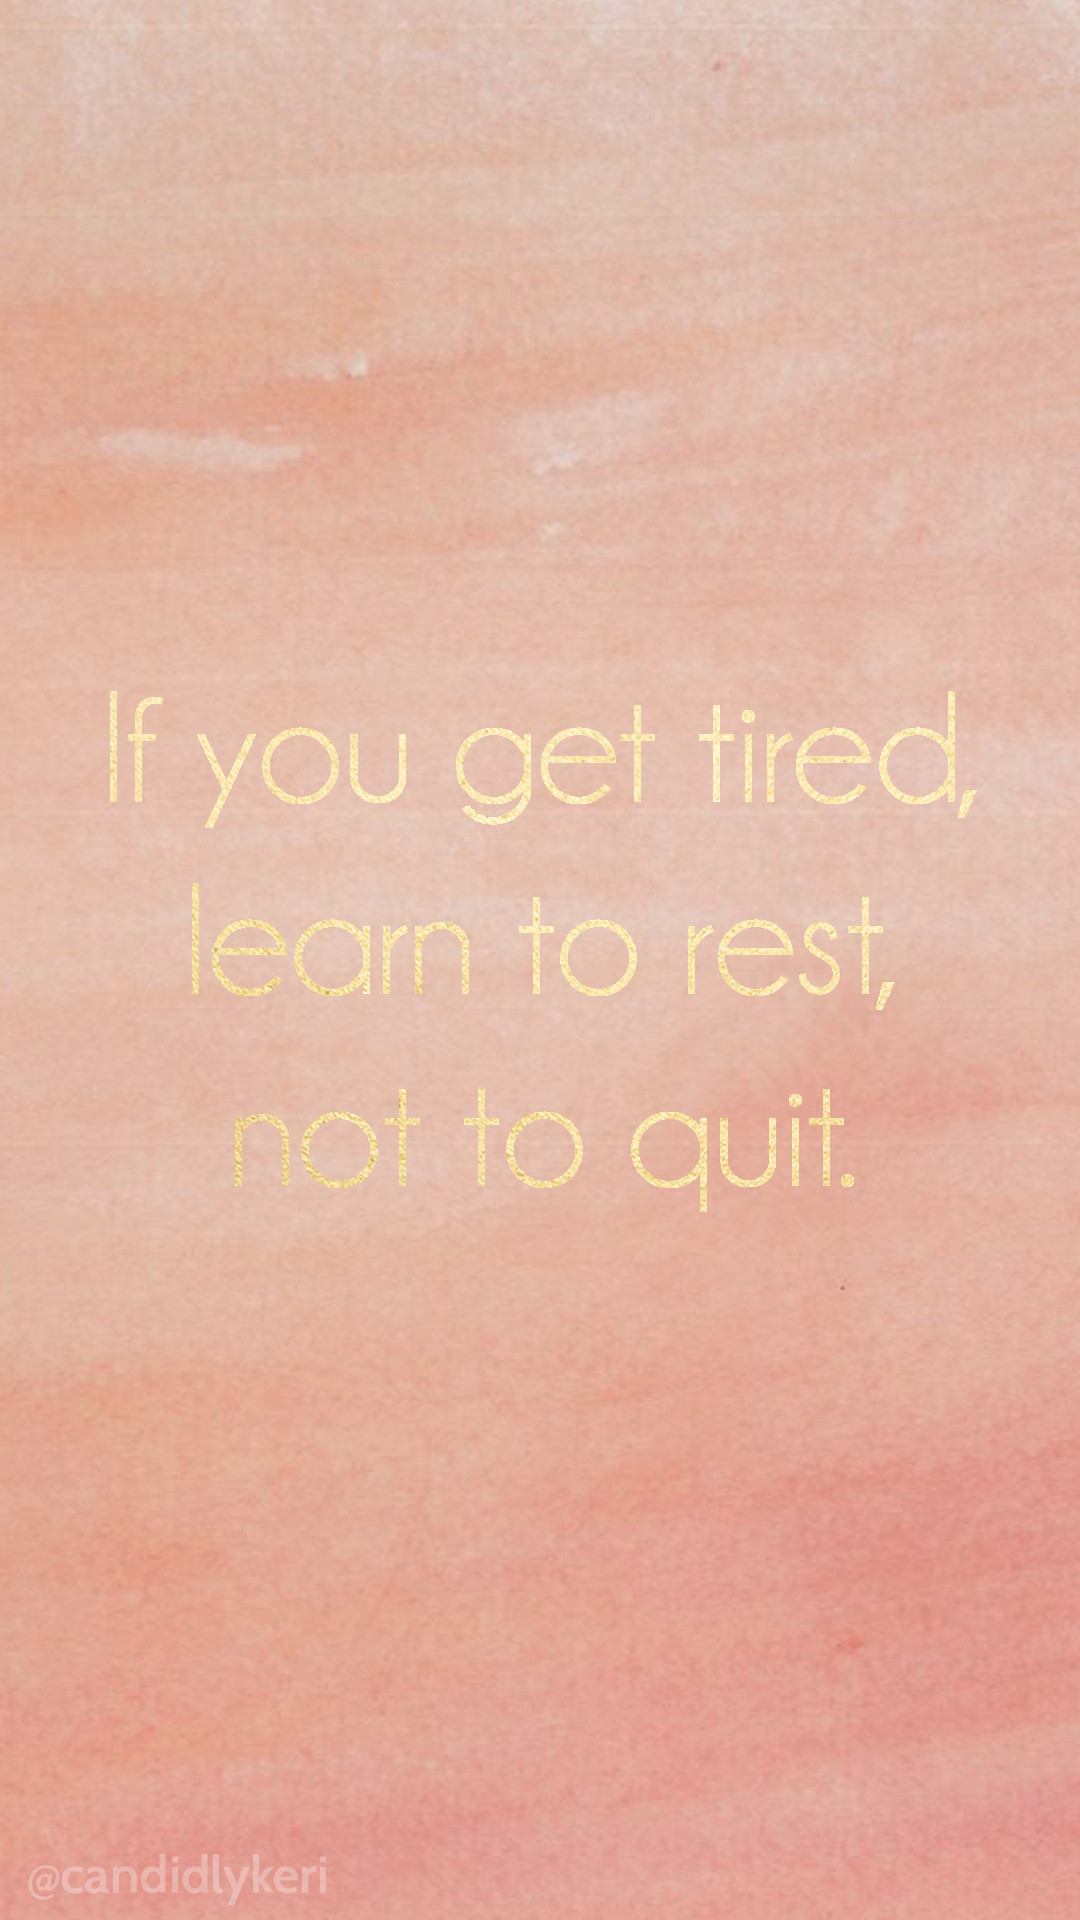 1080x1920 If you get tired, learn to rest, not quit gold foil inspirational  motivational quote